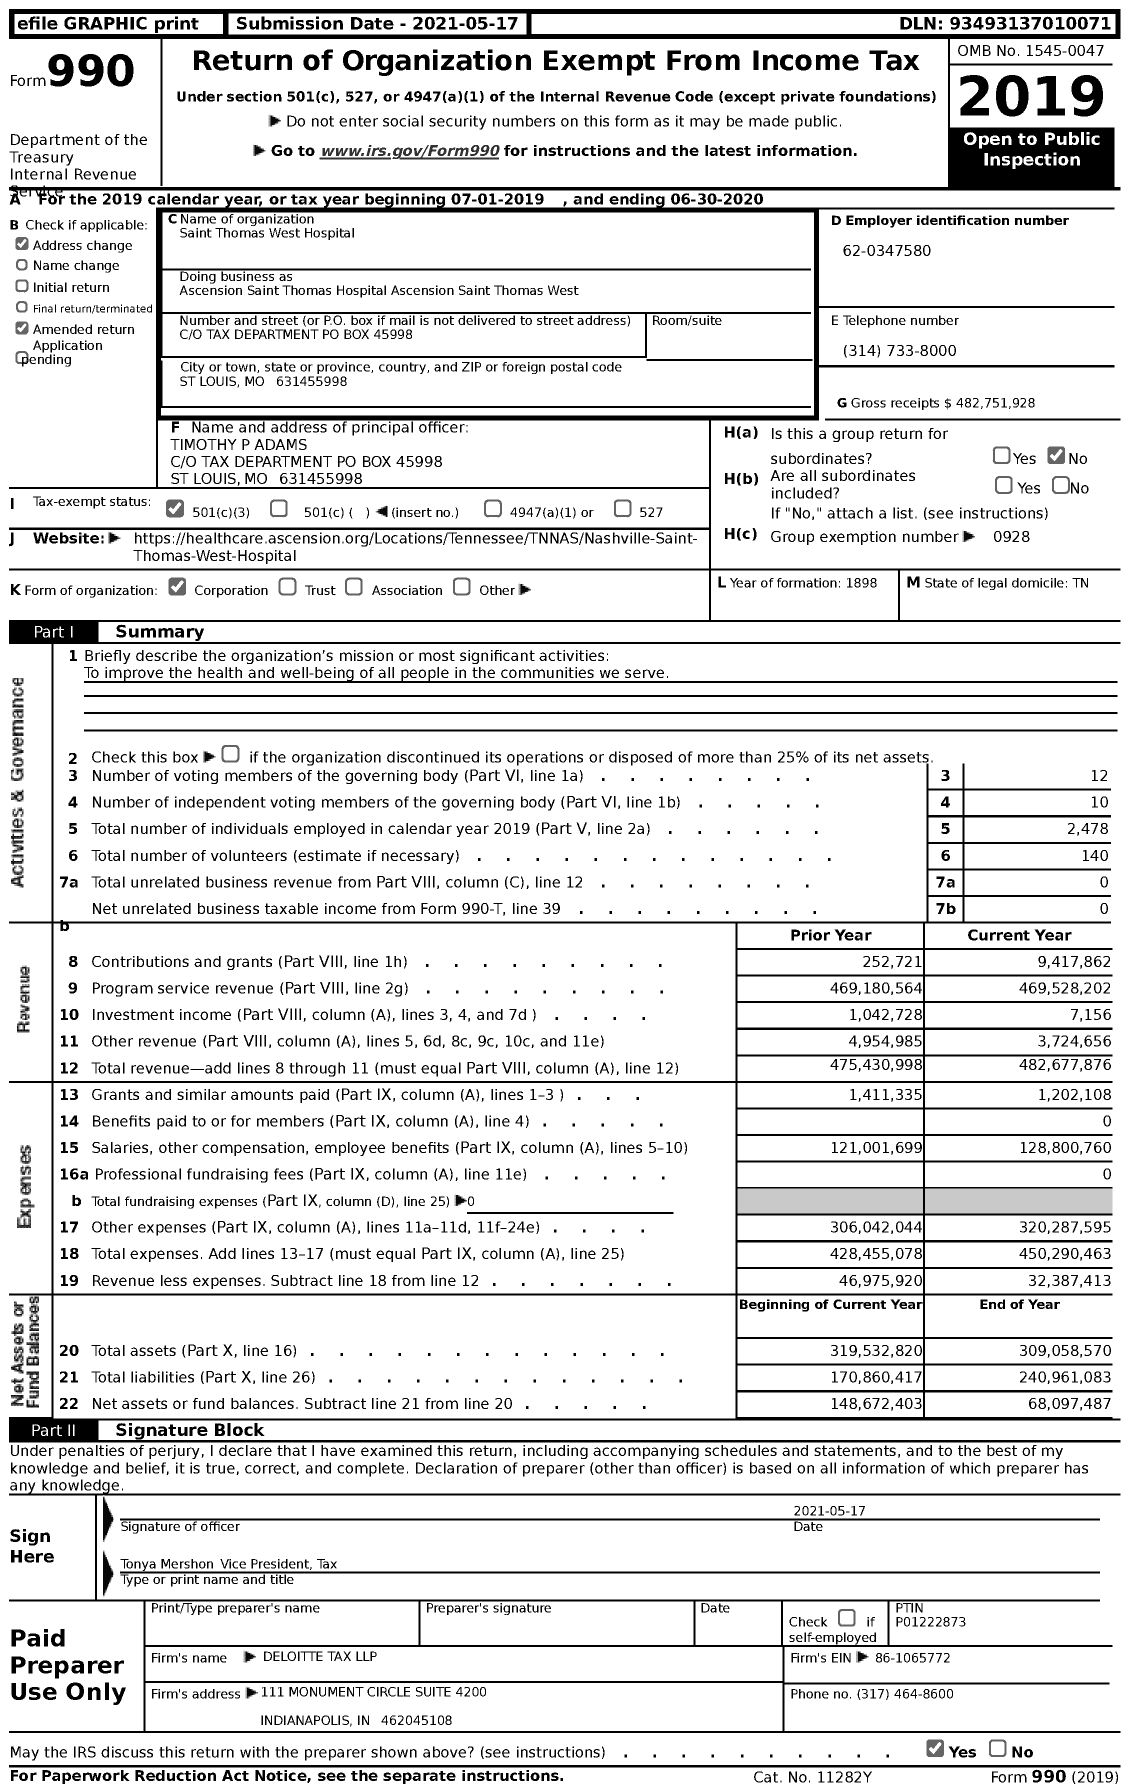 Image of first page of 2019 Form 990 for Ascension Saint Thomas Hospital Ascension Saint Thomas West